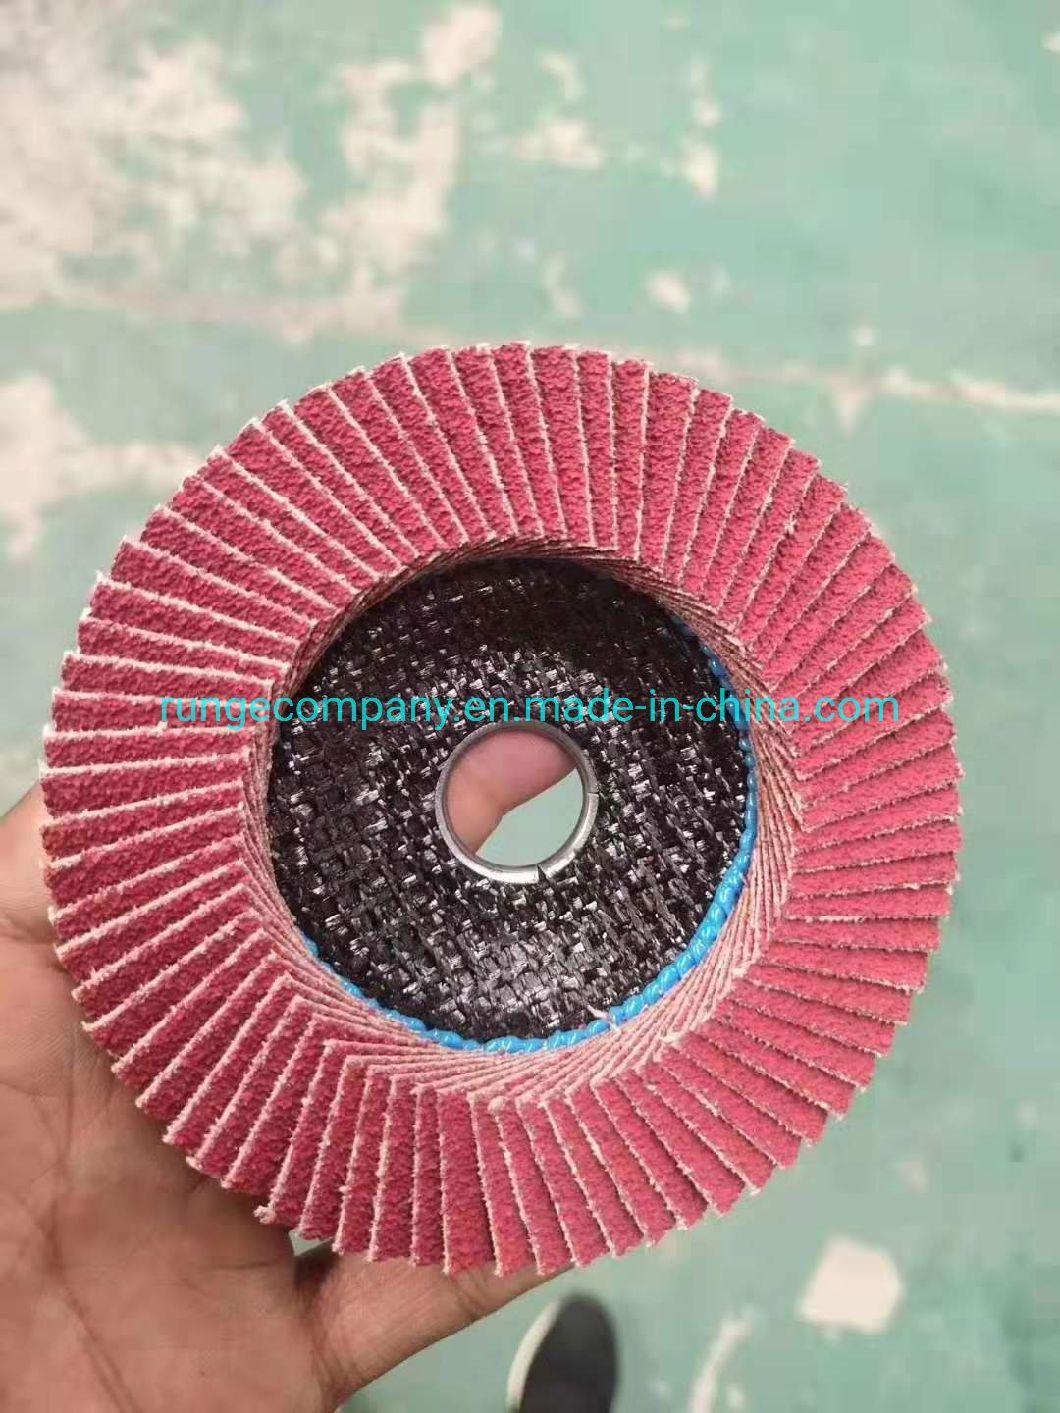 Power Electric Tools Parts 4" Multi Grit Flap Disc for Grinders Conditioning for Metal, Stainless Steel & Non-Ferrous